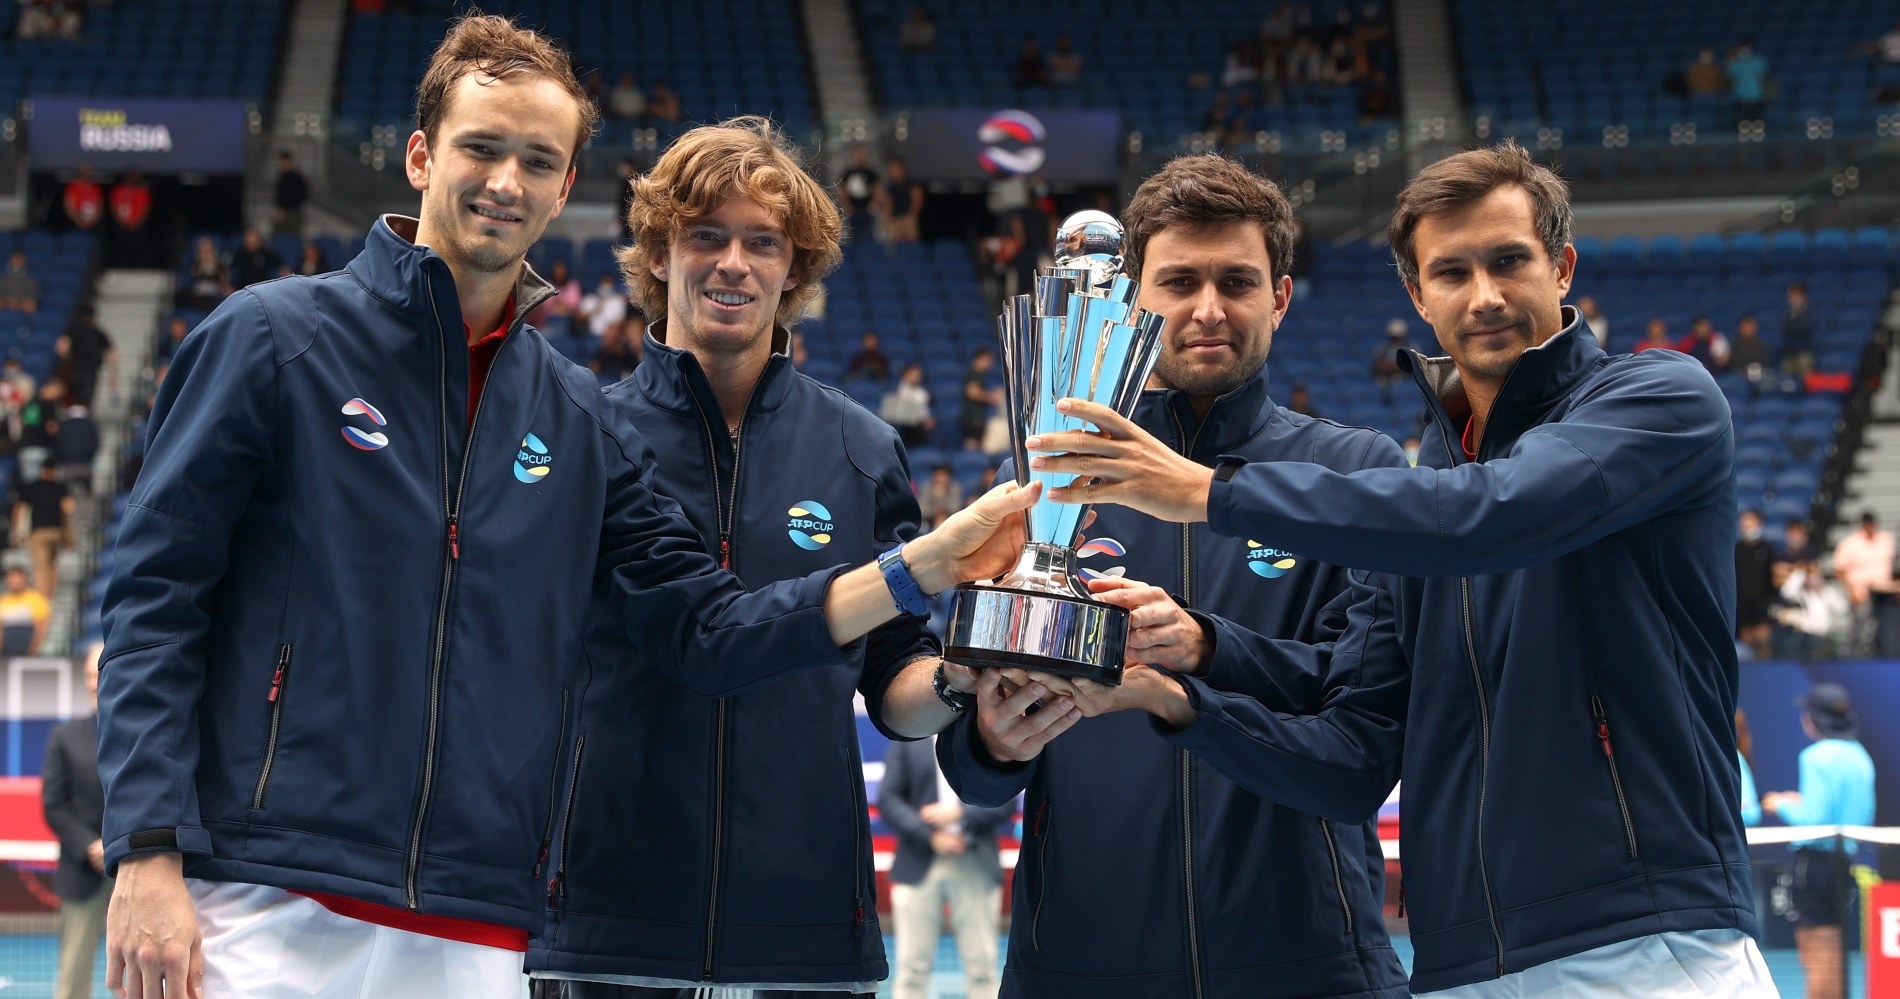 Atp Cup 2021, Russia -